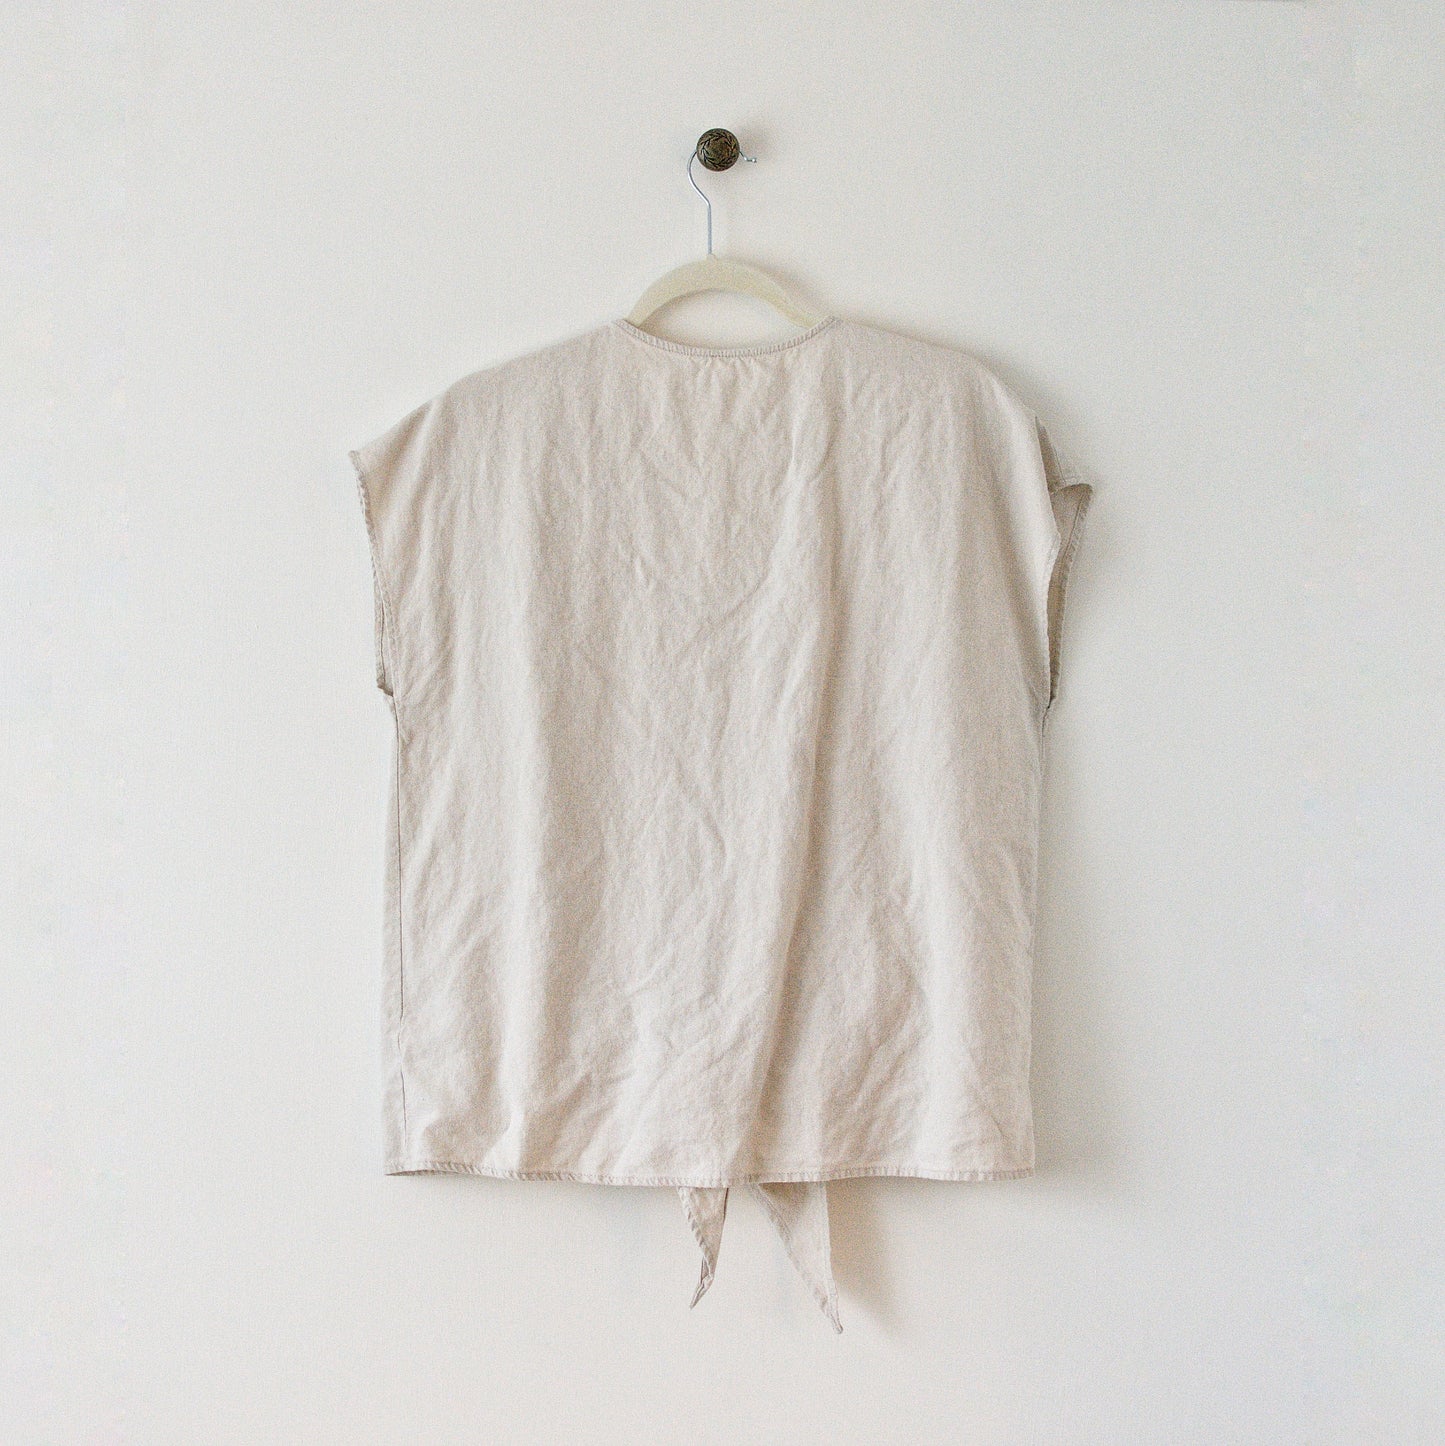 Large Axis Apparel Top